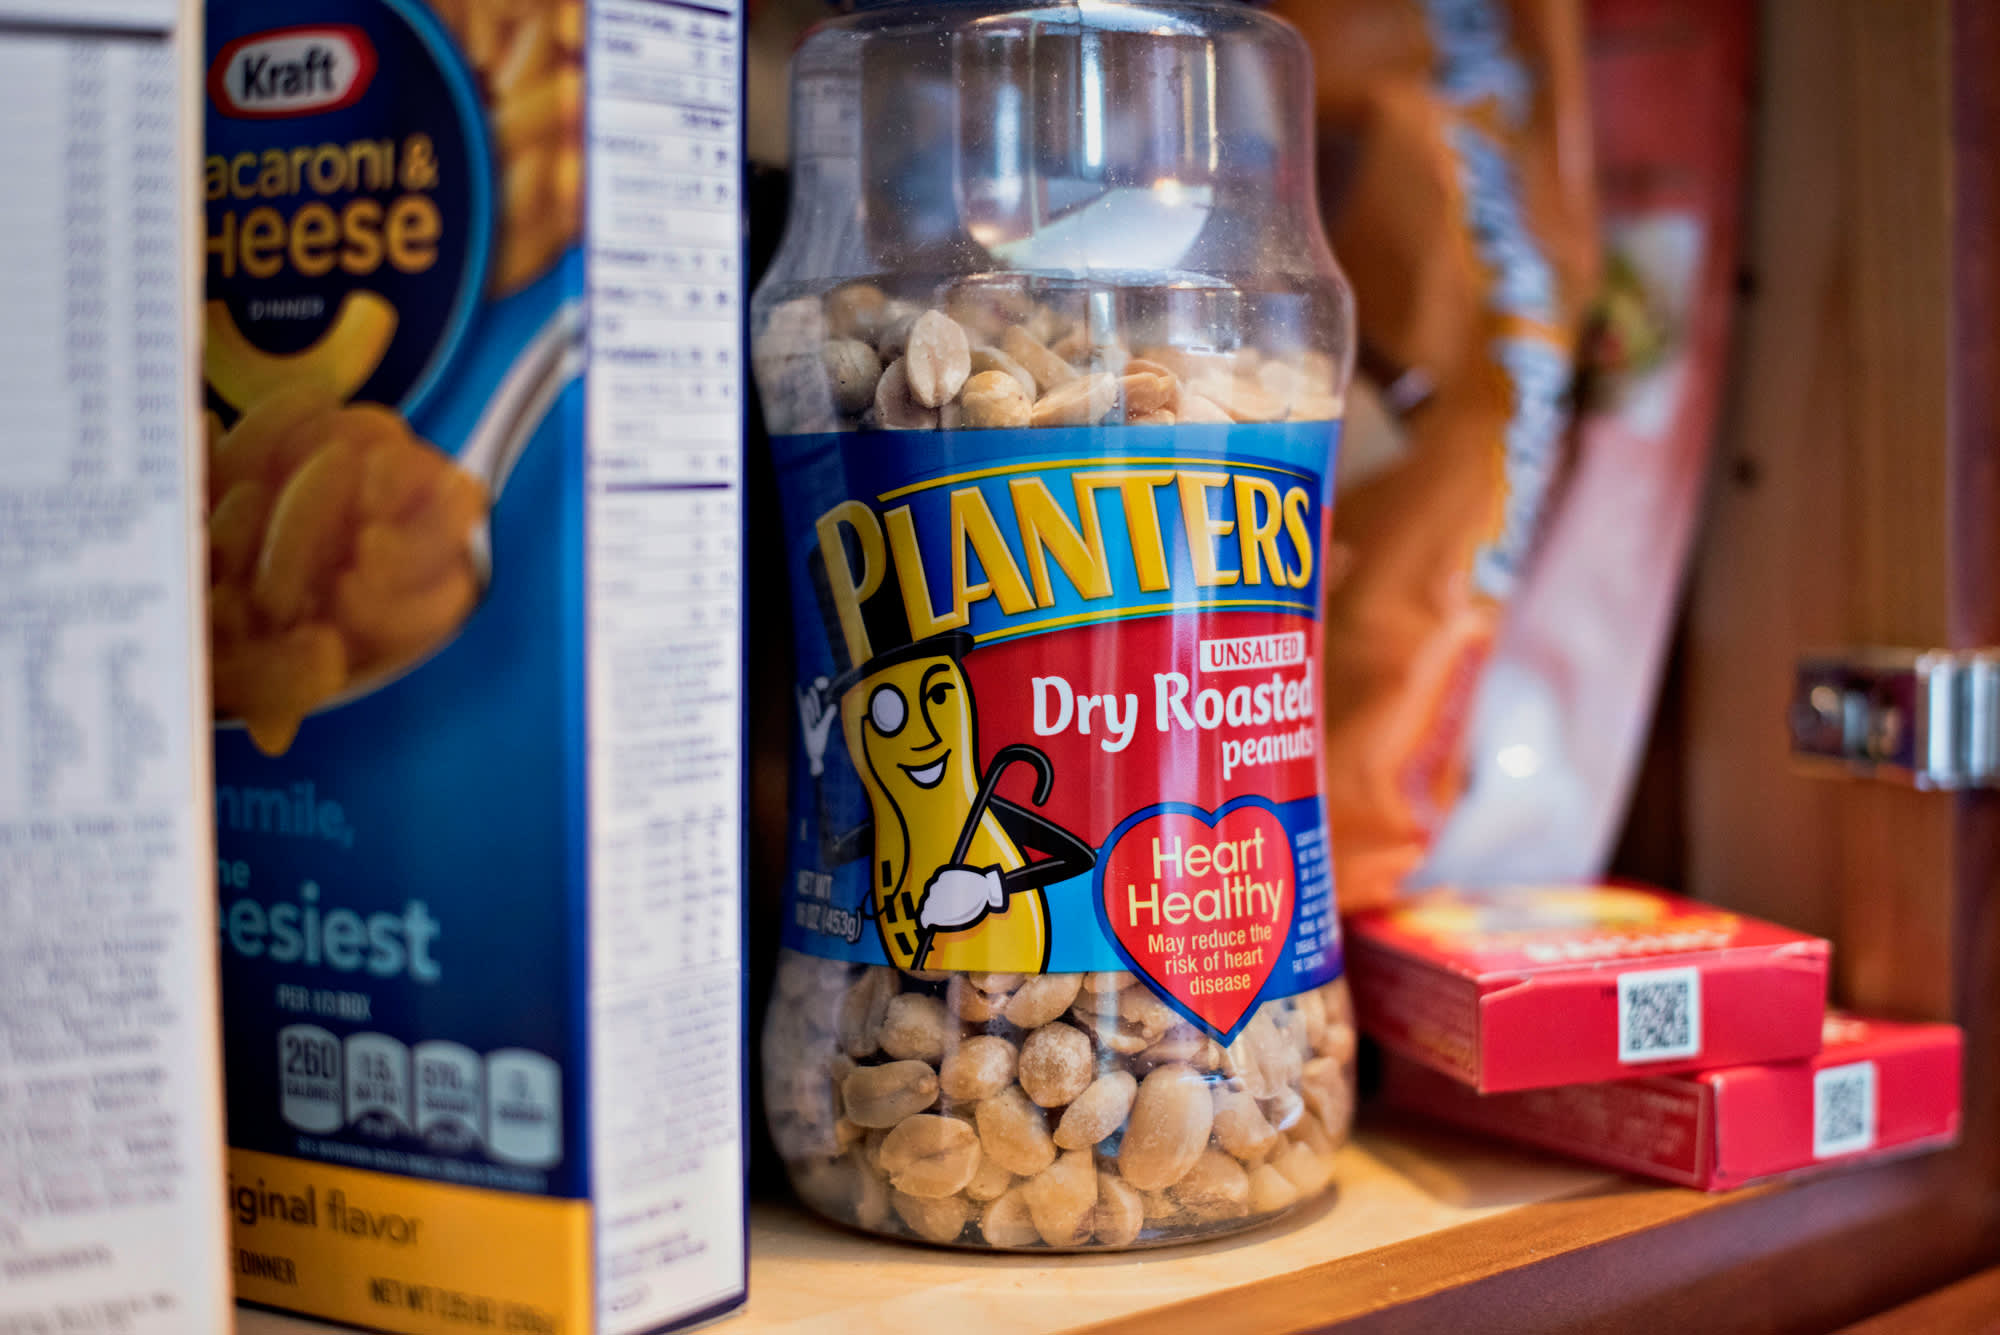 Kraft Heinz is reportedly in talks to sell Planters for $ 3 billion to Hormel